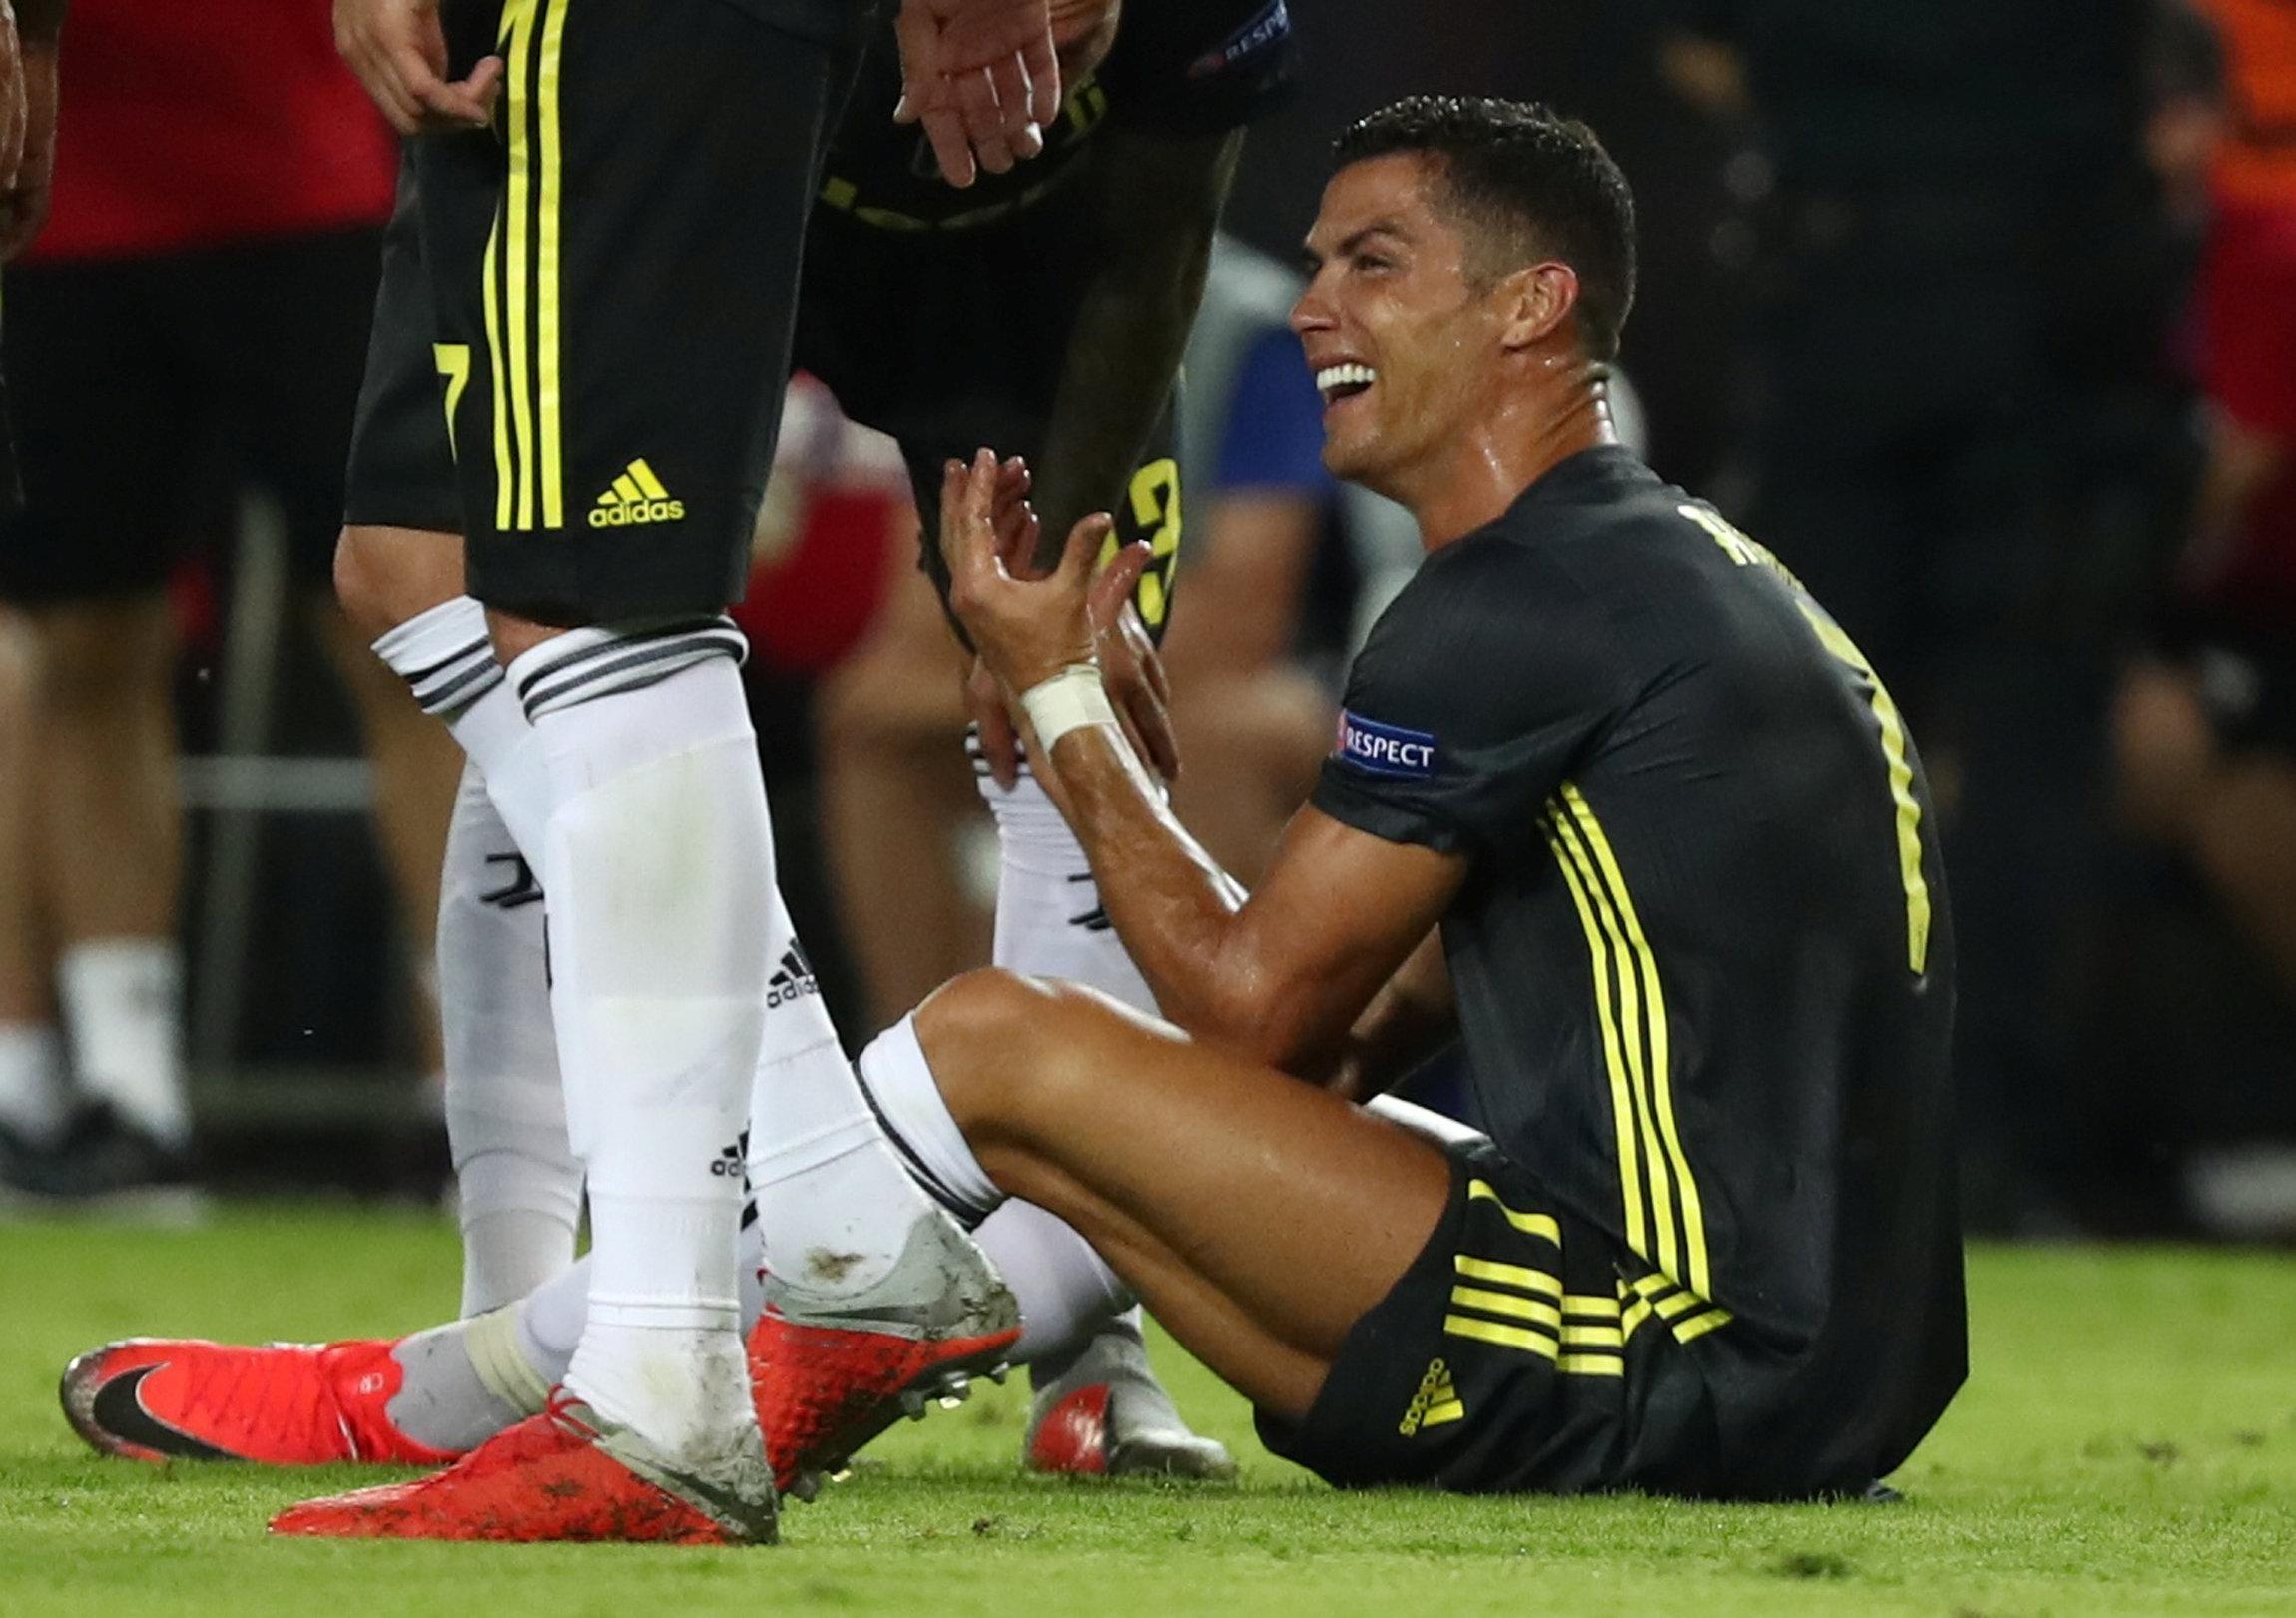 ronaldo 190918e Ronaldo was shown red card in his Champions League debut match for Juventus